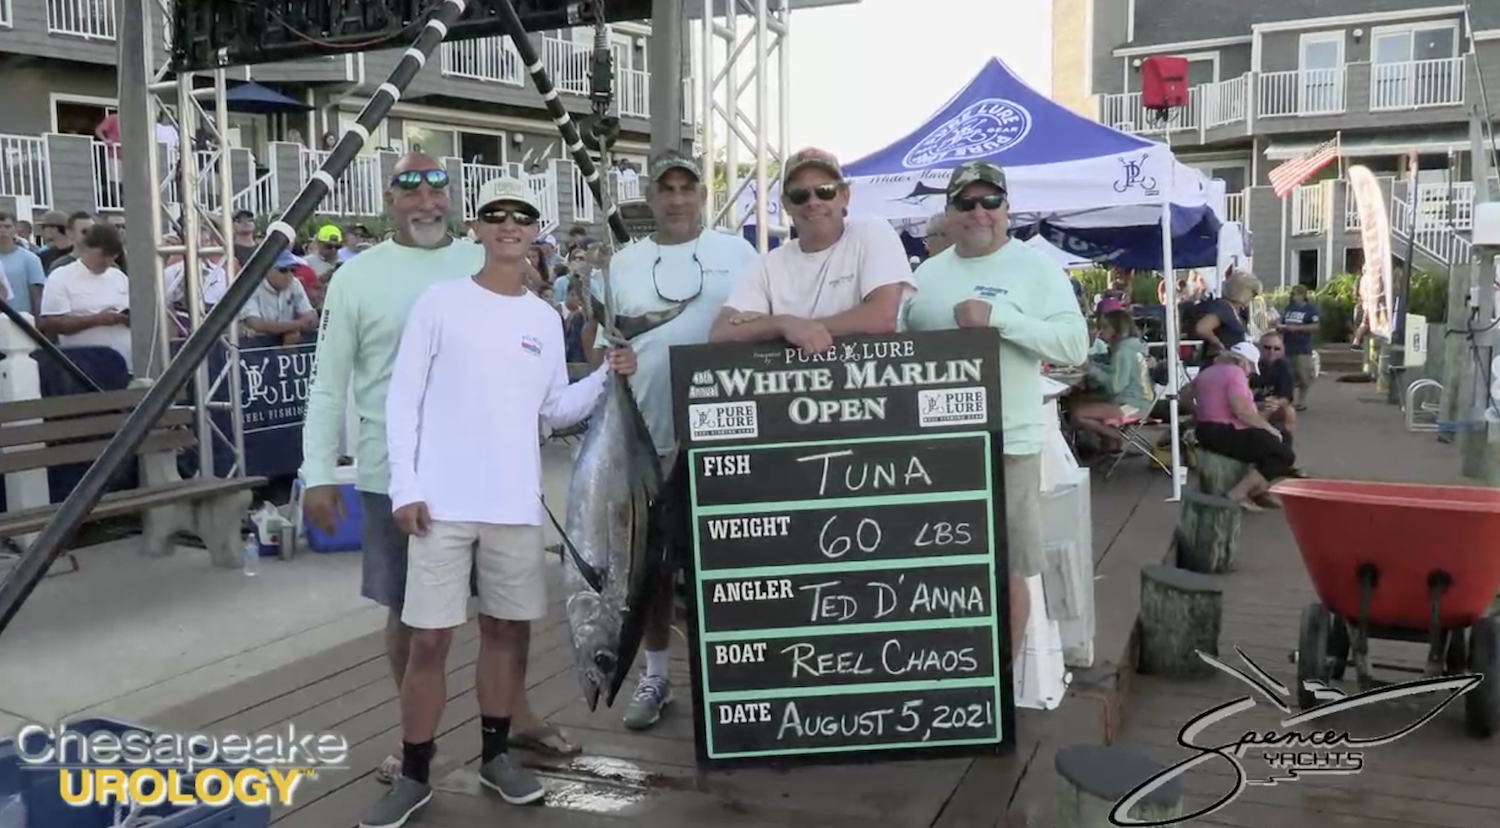 60 Pound Tuna Wins $80,000 on Day 4 at the 2021 White Marlin Open